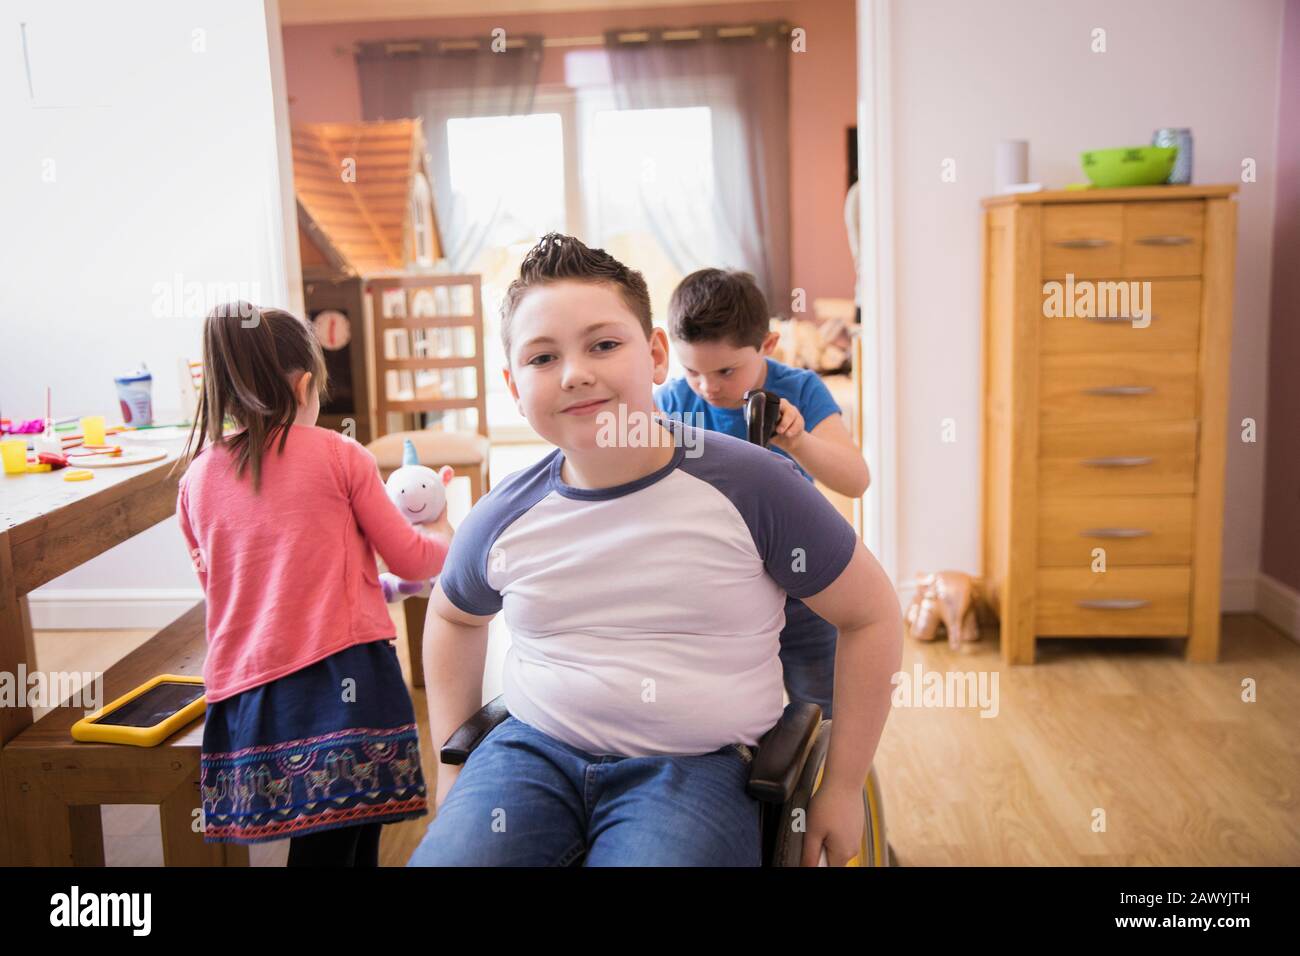 Portrait smiling boy in wheelchair at home Stock Photo